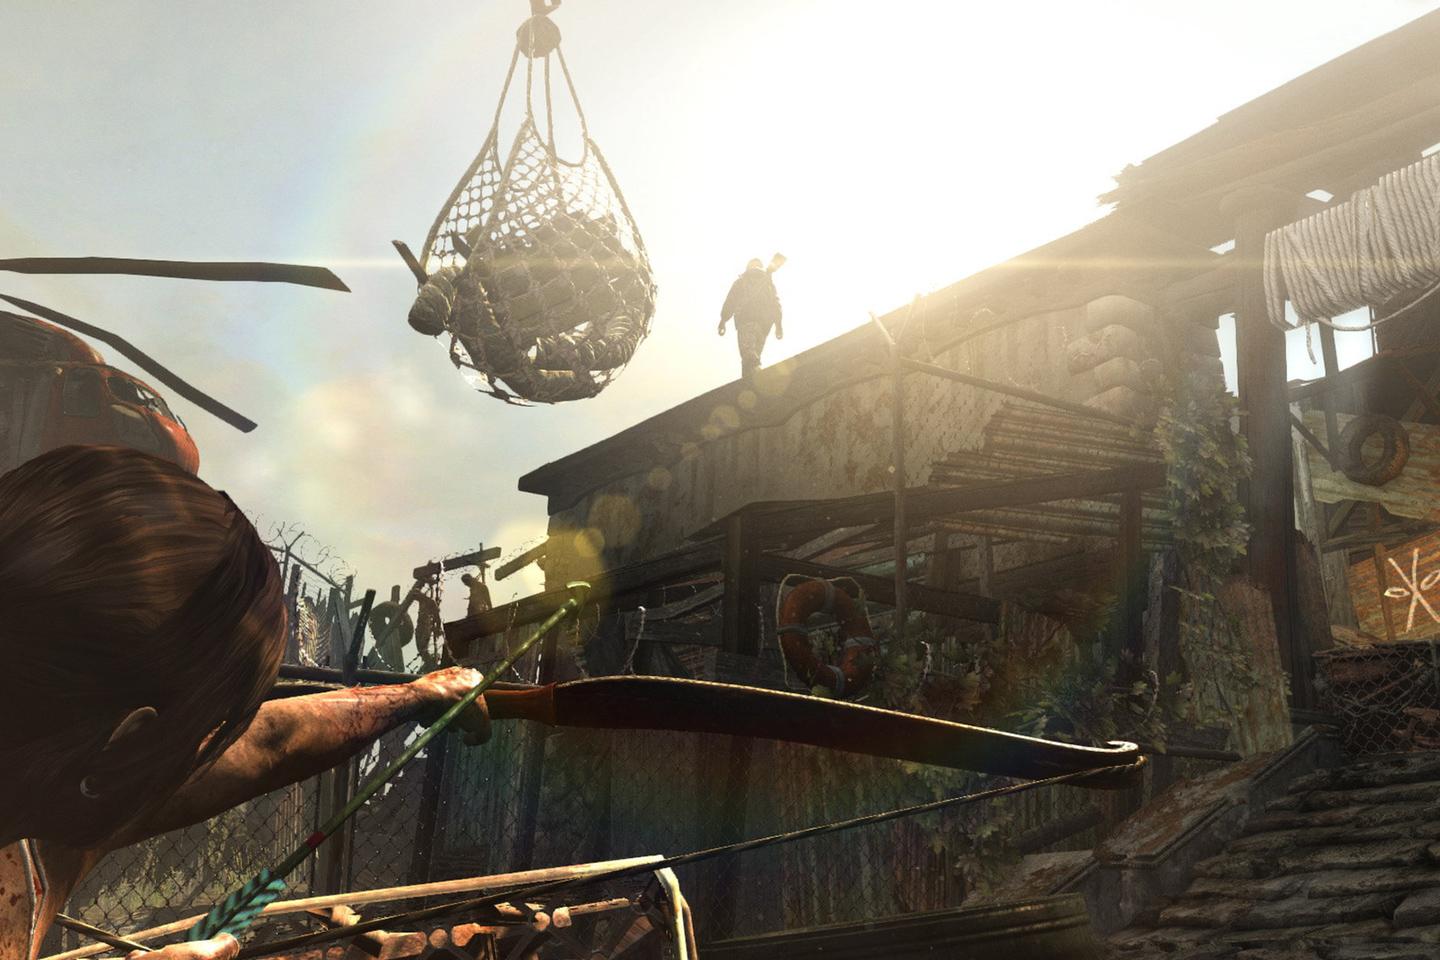 Lara pointing sword toward silhouette of person standing on rooftop while supplies hang in fishing net above their heads. 